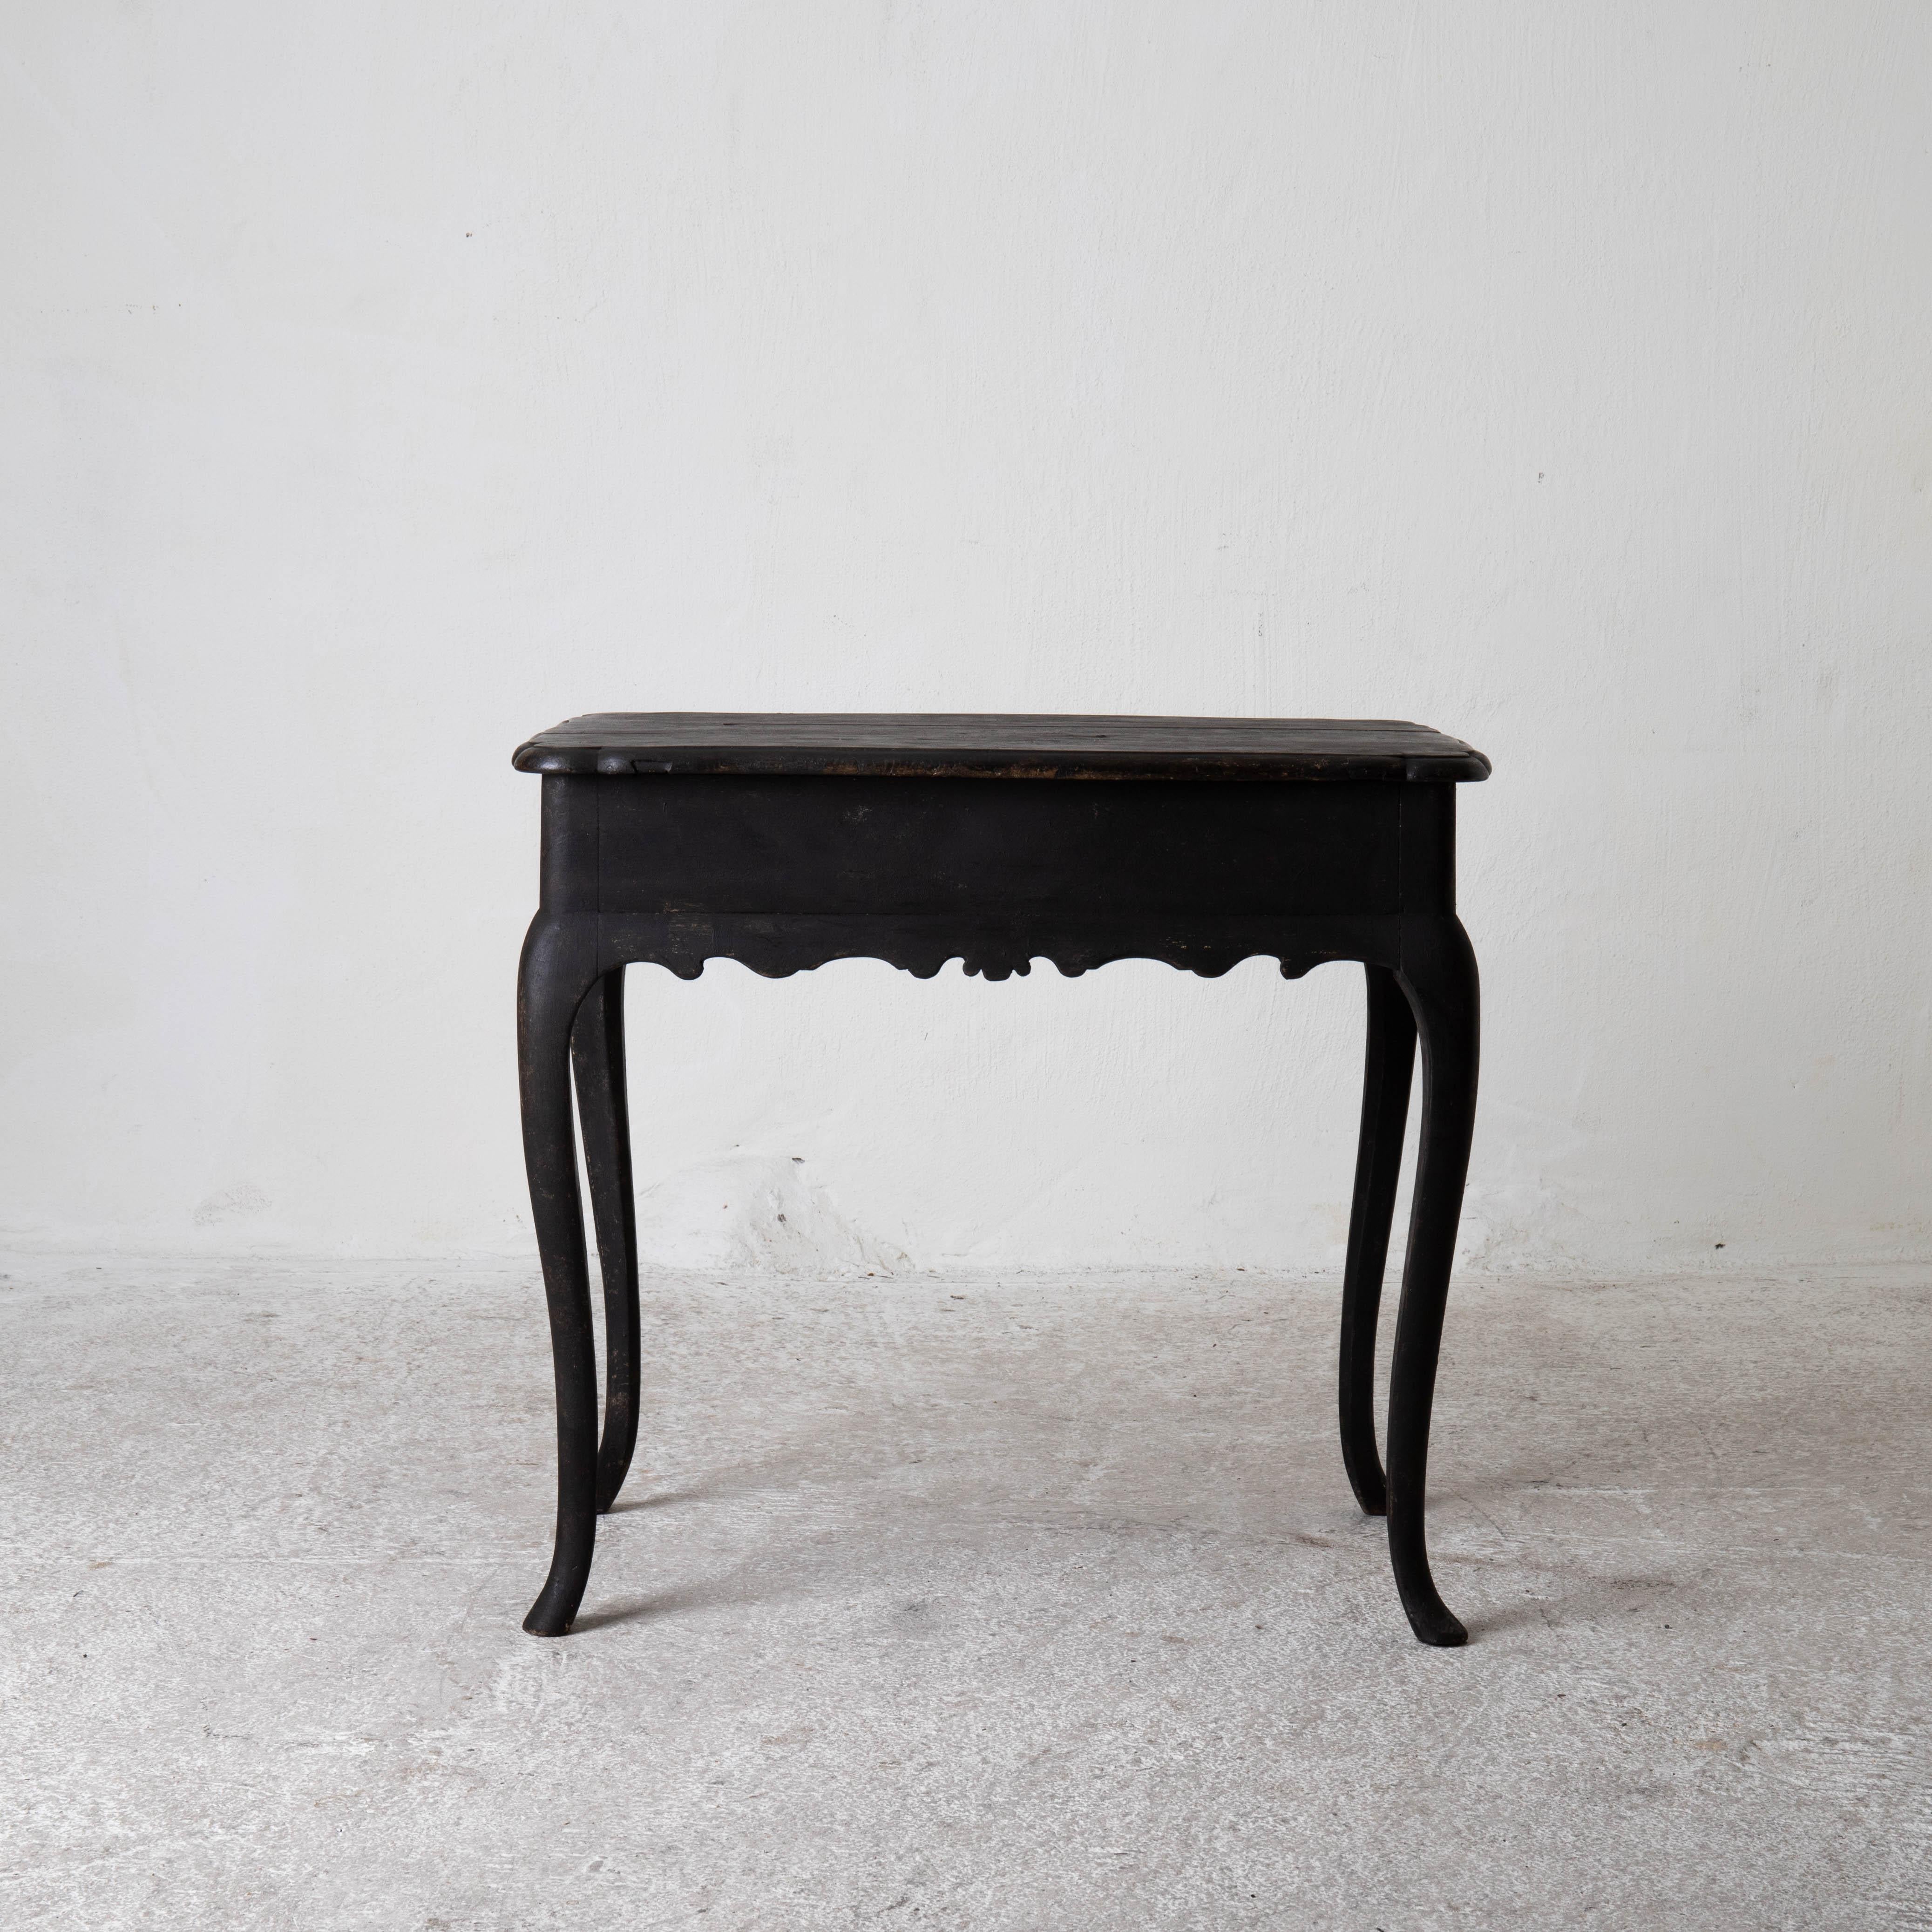 Side table Swedish Rococo black Sweden. Side table Rococo period 1750-1775 refinished in our Laserow Black. Wavy frieze and S shaped legs. Rounded corners on the table top.